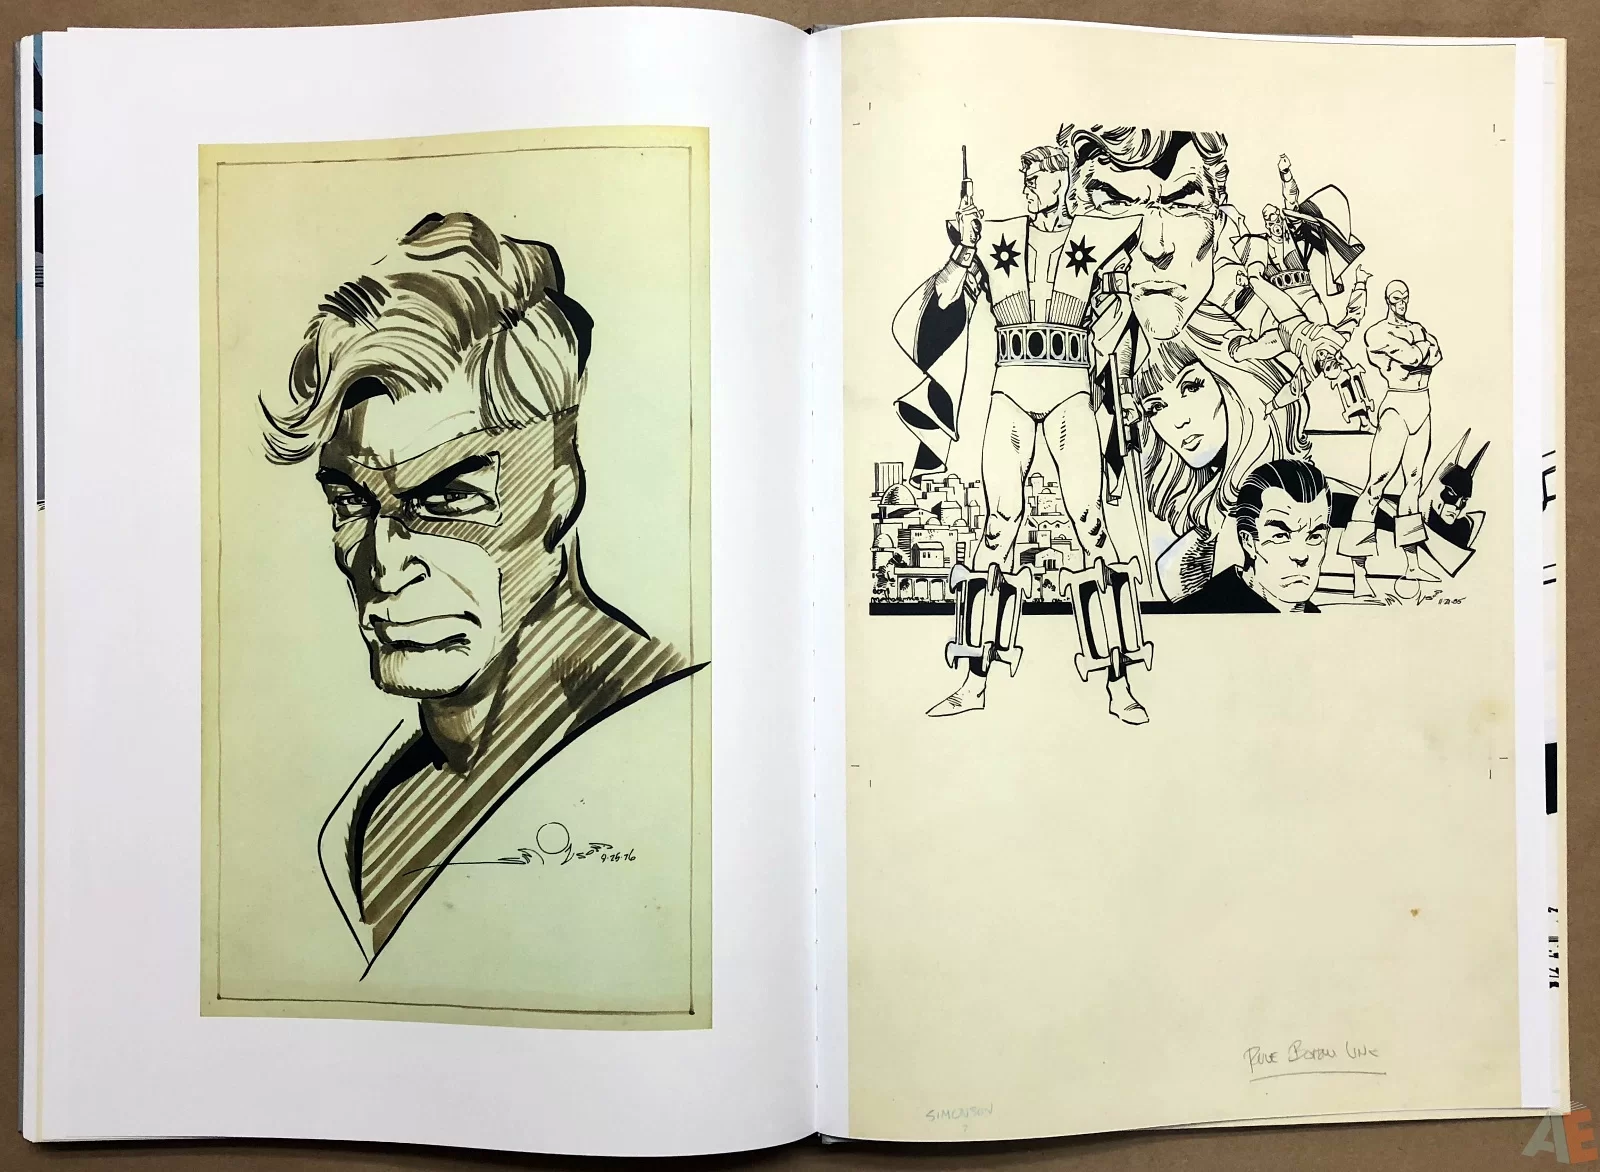 Walter Simonson Manhunter and Other Stories Artist’s Edition